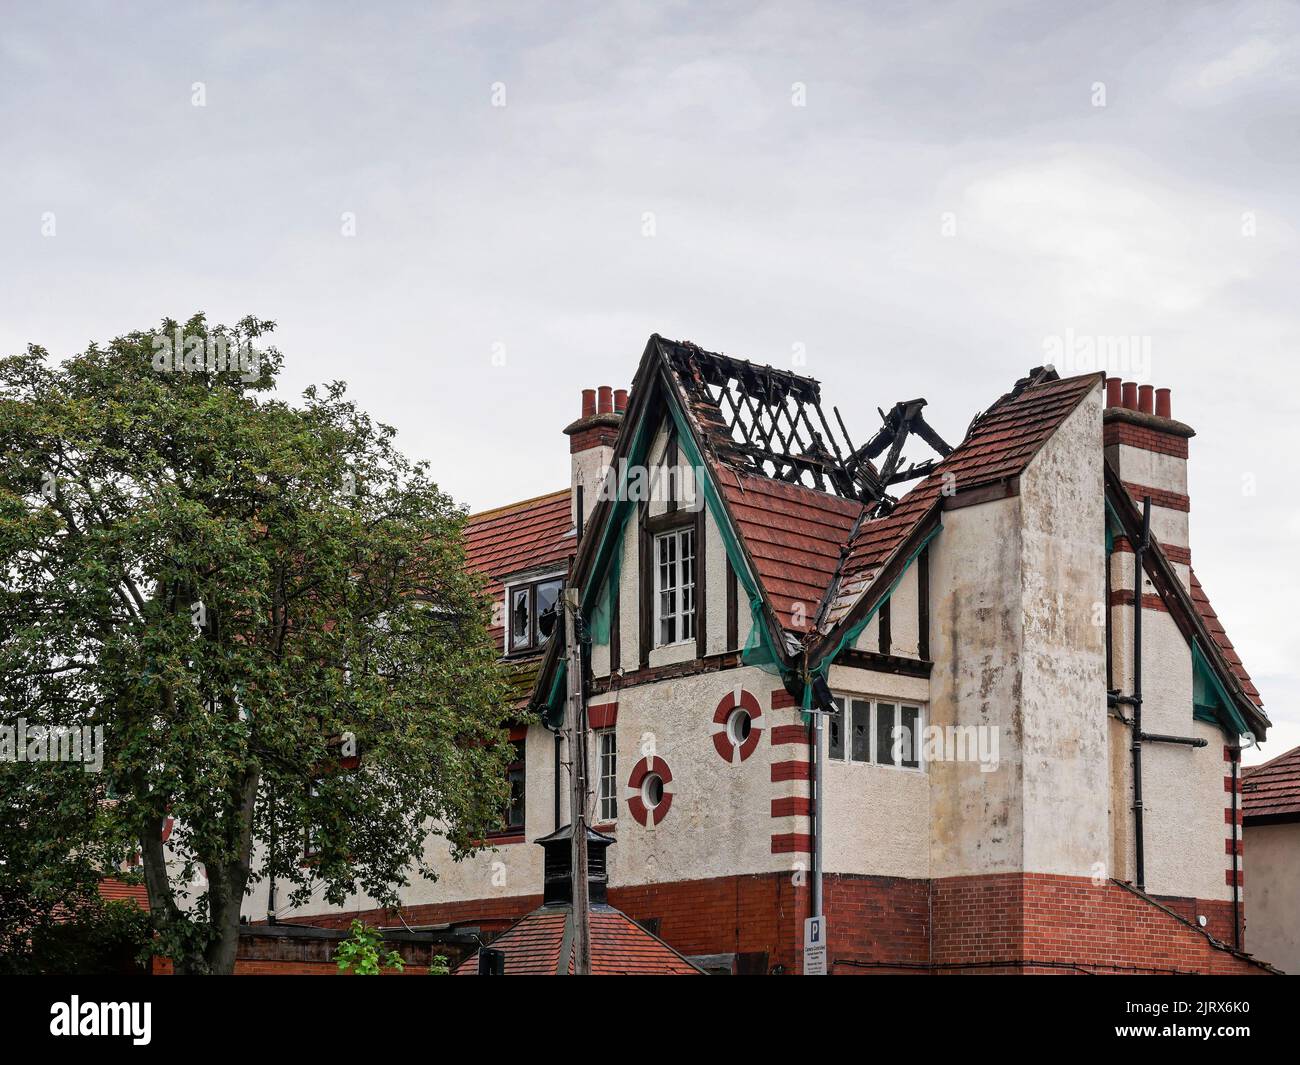 Building with damaged windows and roof, Gosforth, UK Stock Photo